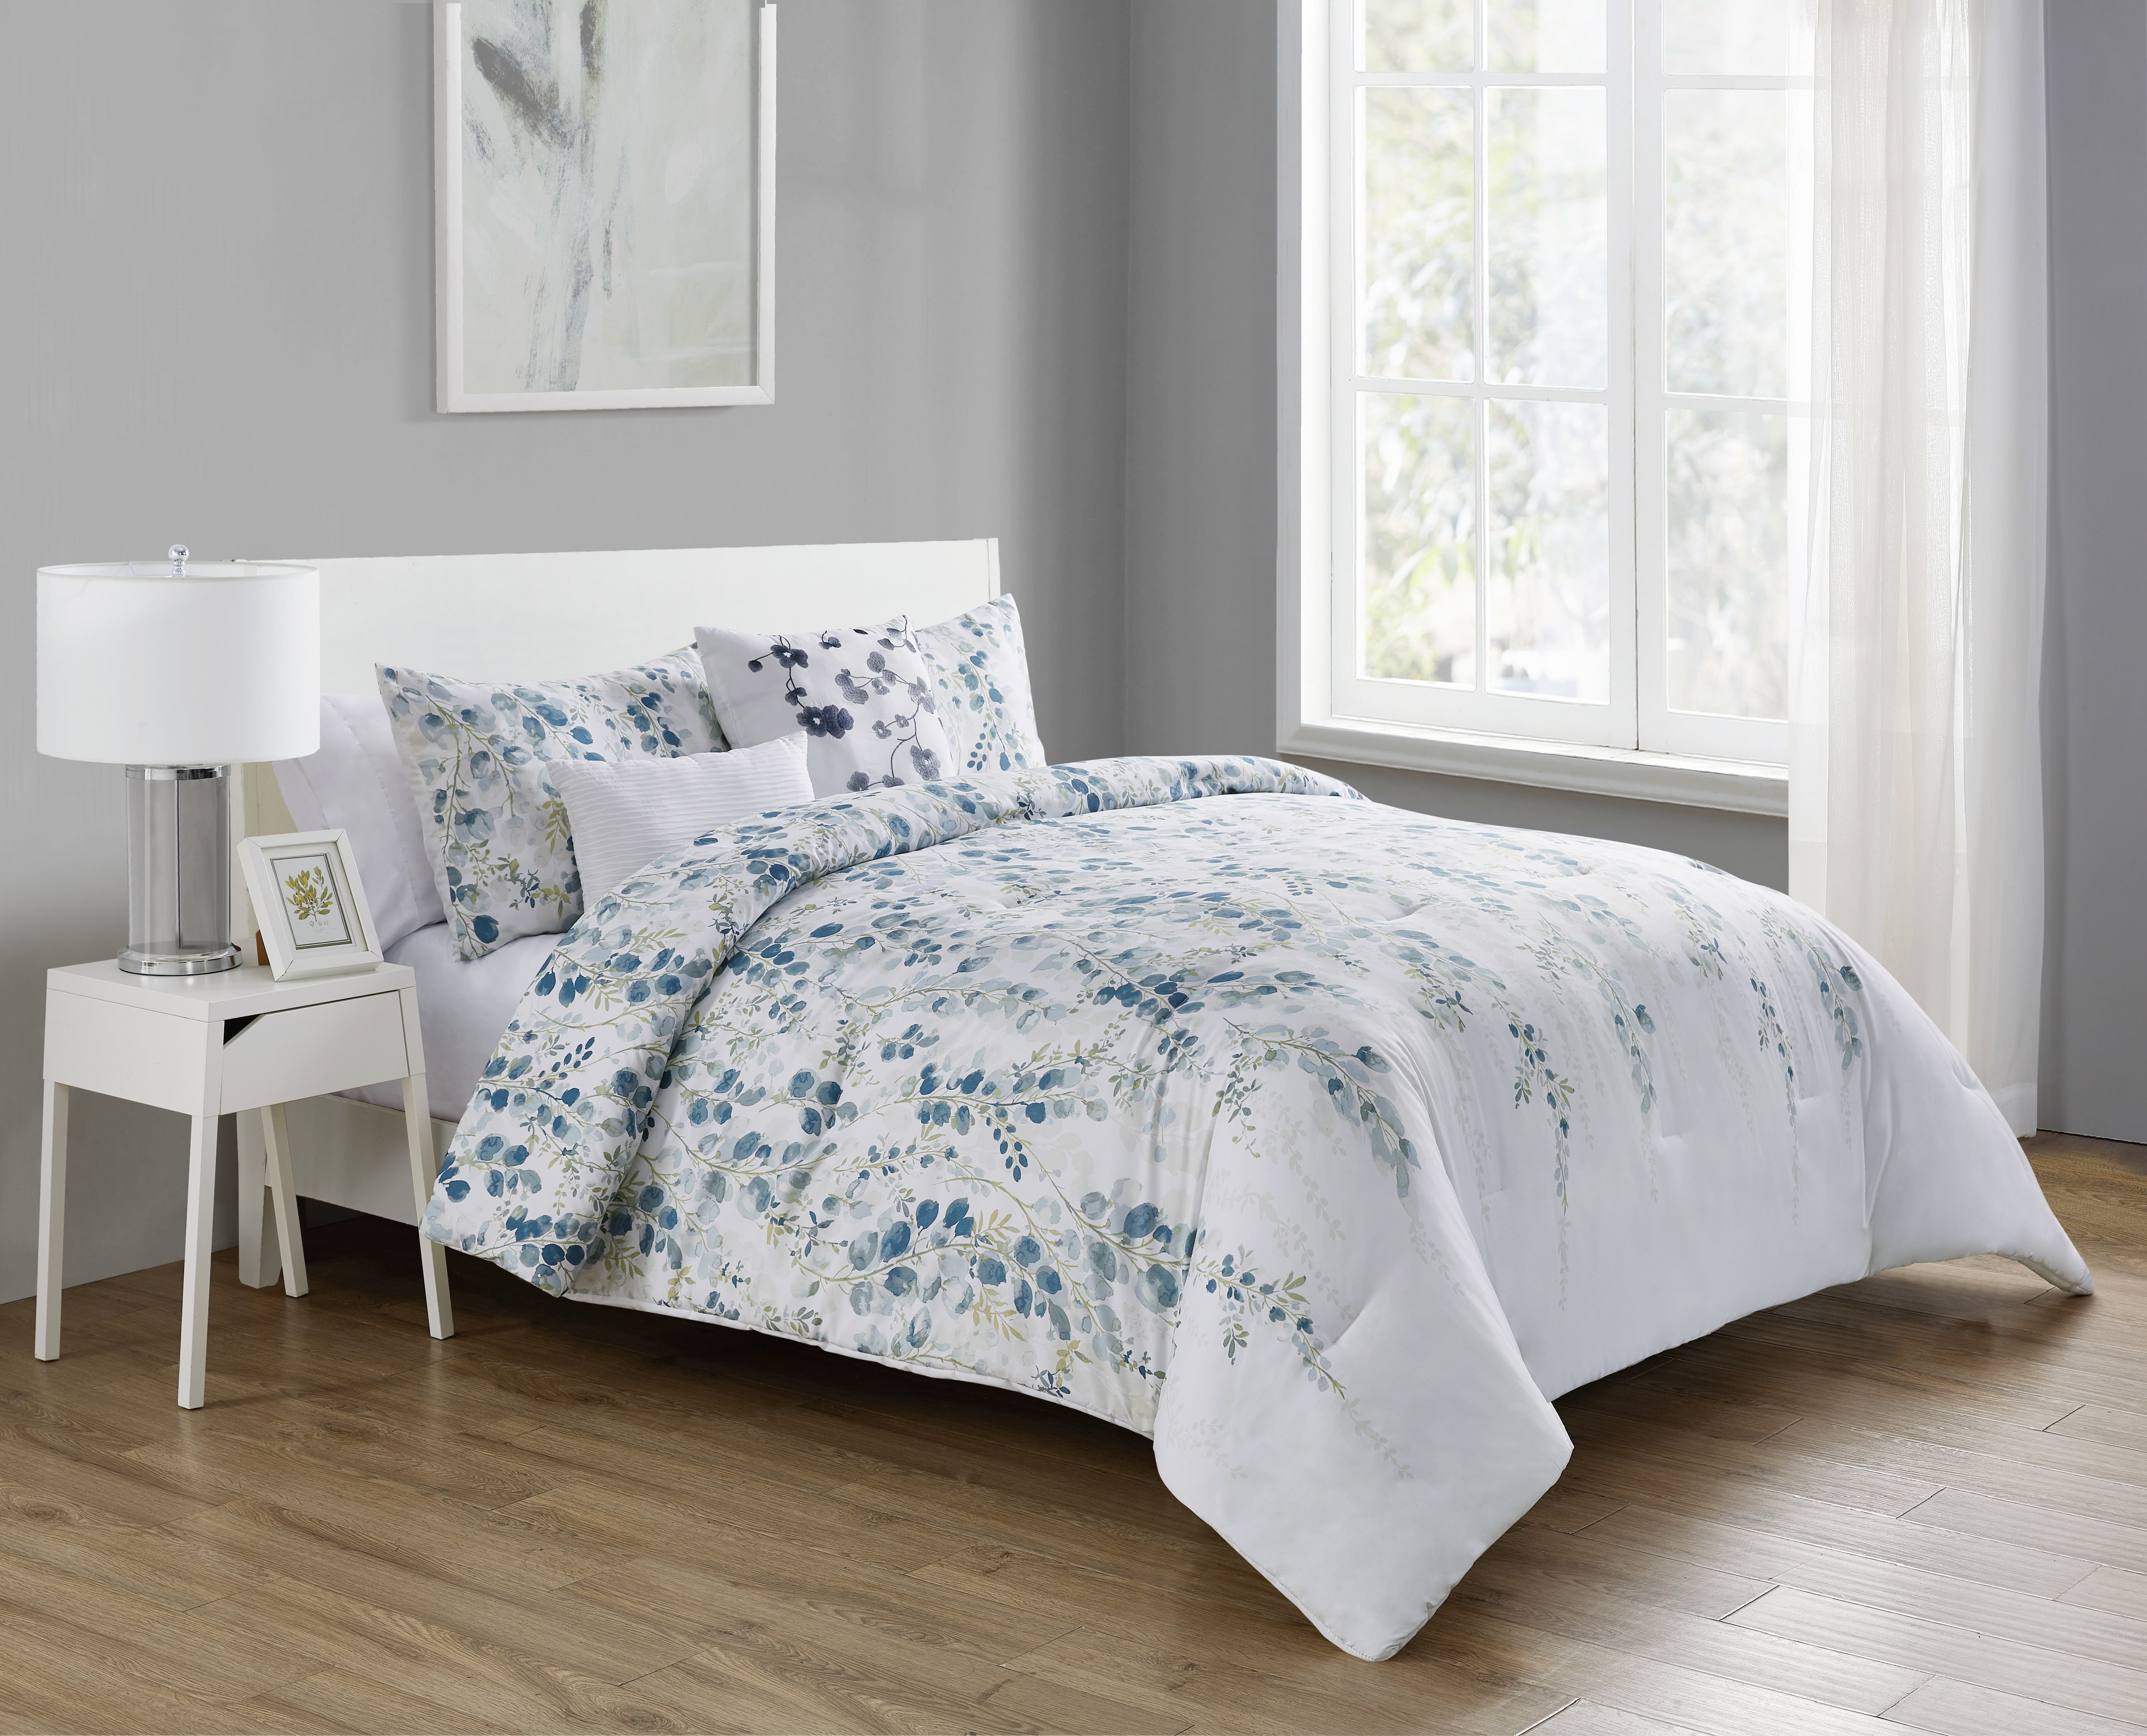 VCNY Home Hailey Blue and White Floral Comforter Set, Twin/Twin XL, Blue/White